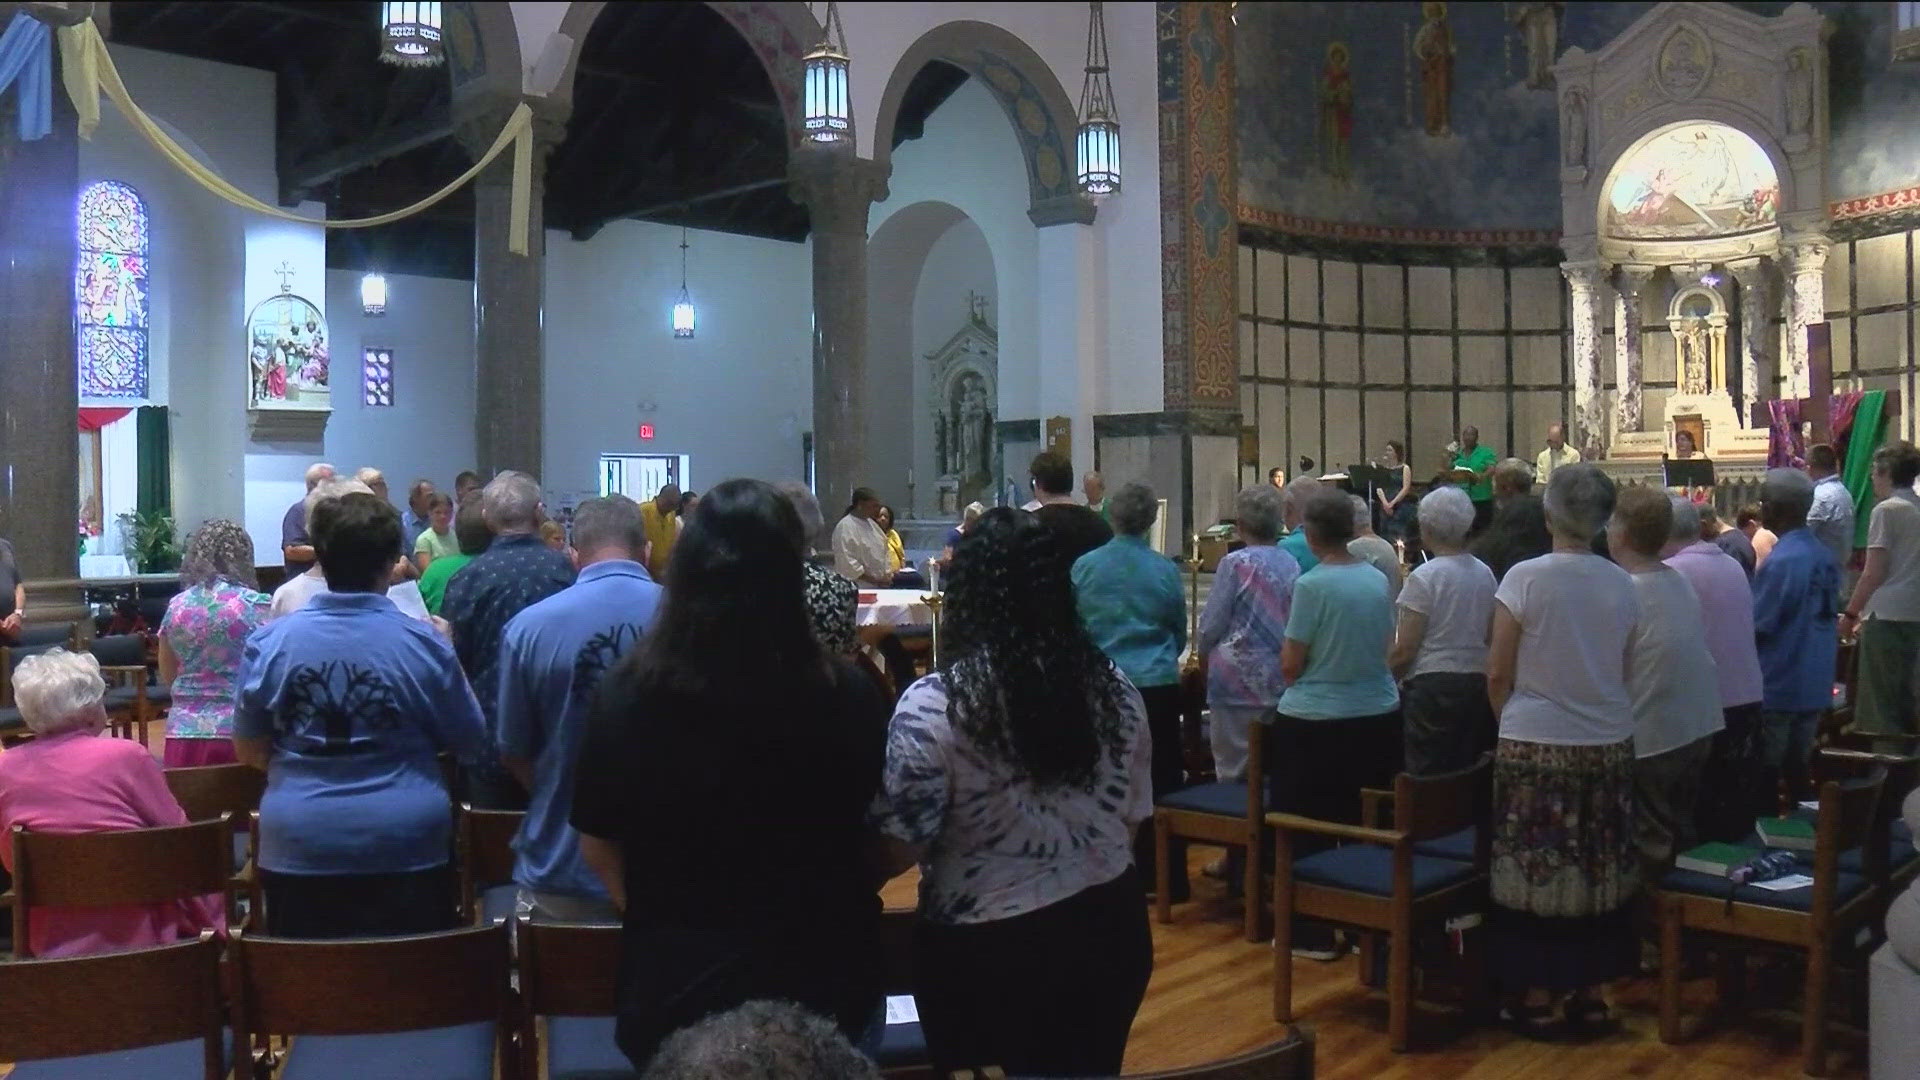 The congregation celebrated Sunday both the anniversary of the church's founding and the 100-year anniversary of the cornerstone being established.